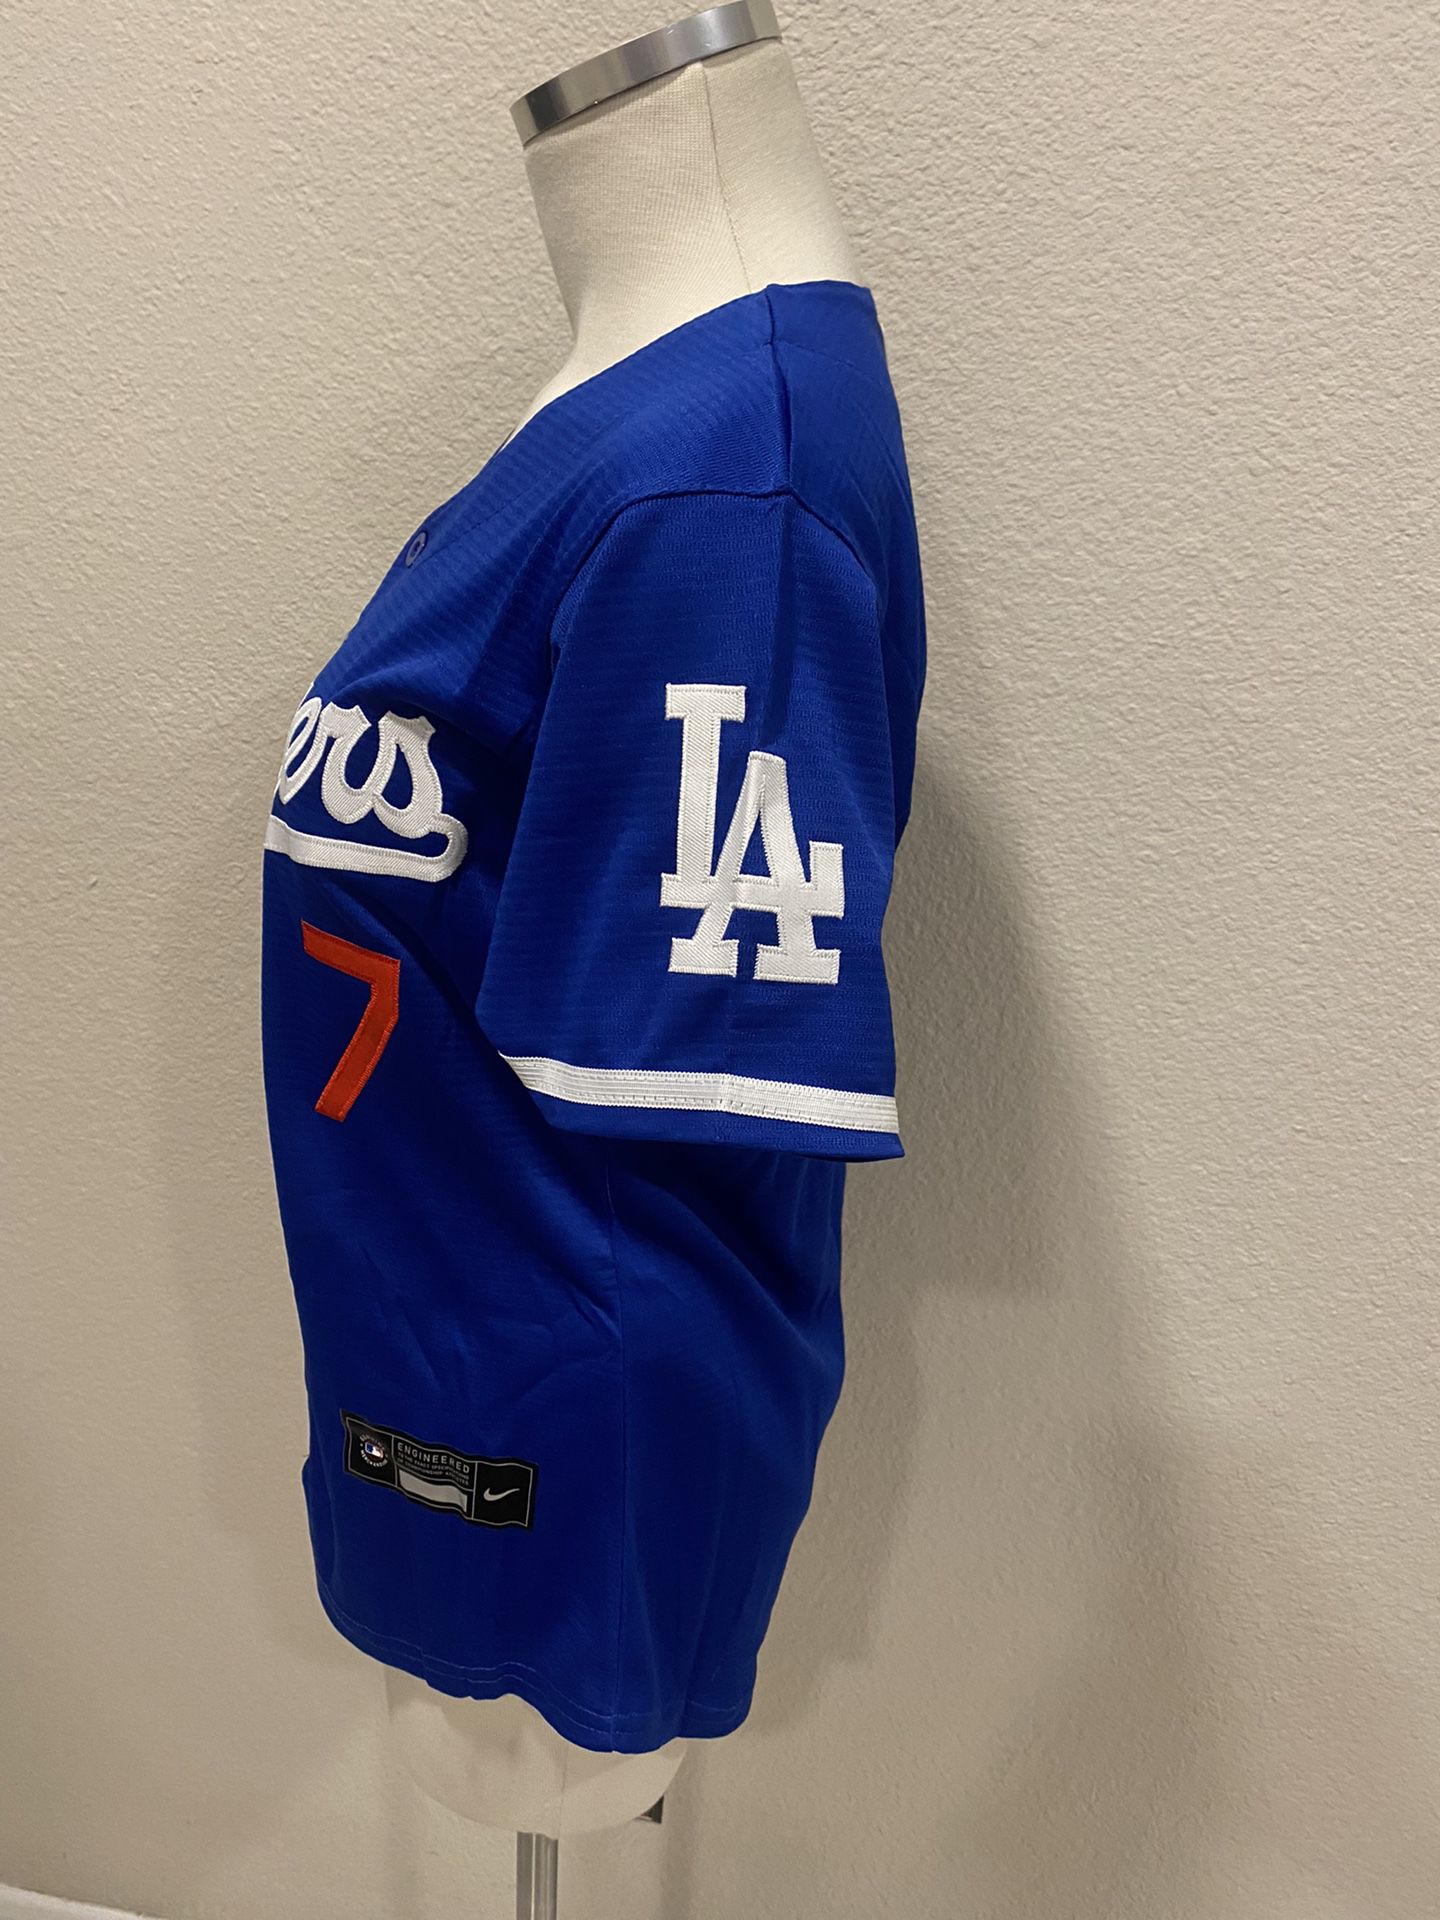 Women's Julio Urias Blue Dodgers Jersey for Sale in Moreno Valley, CA -  OfferUp